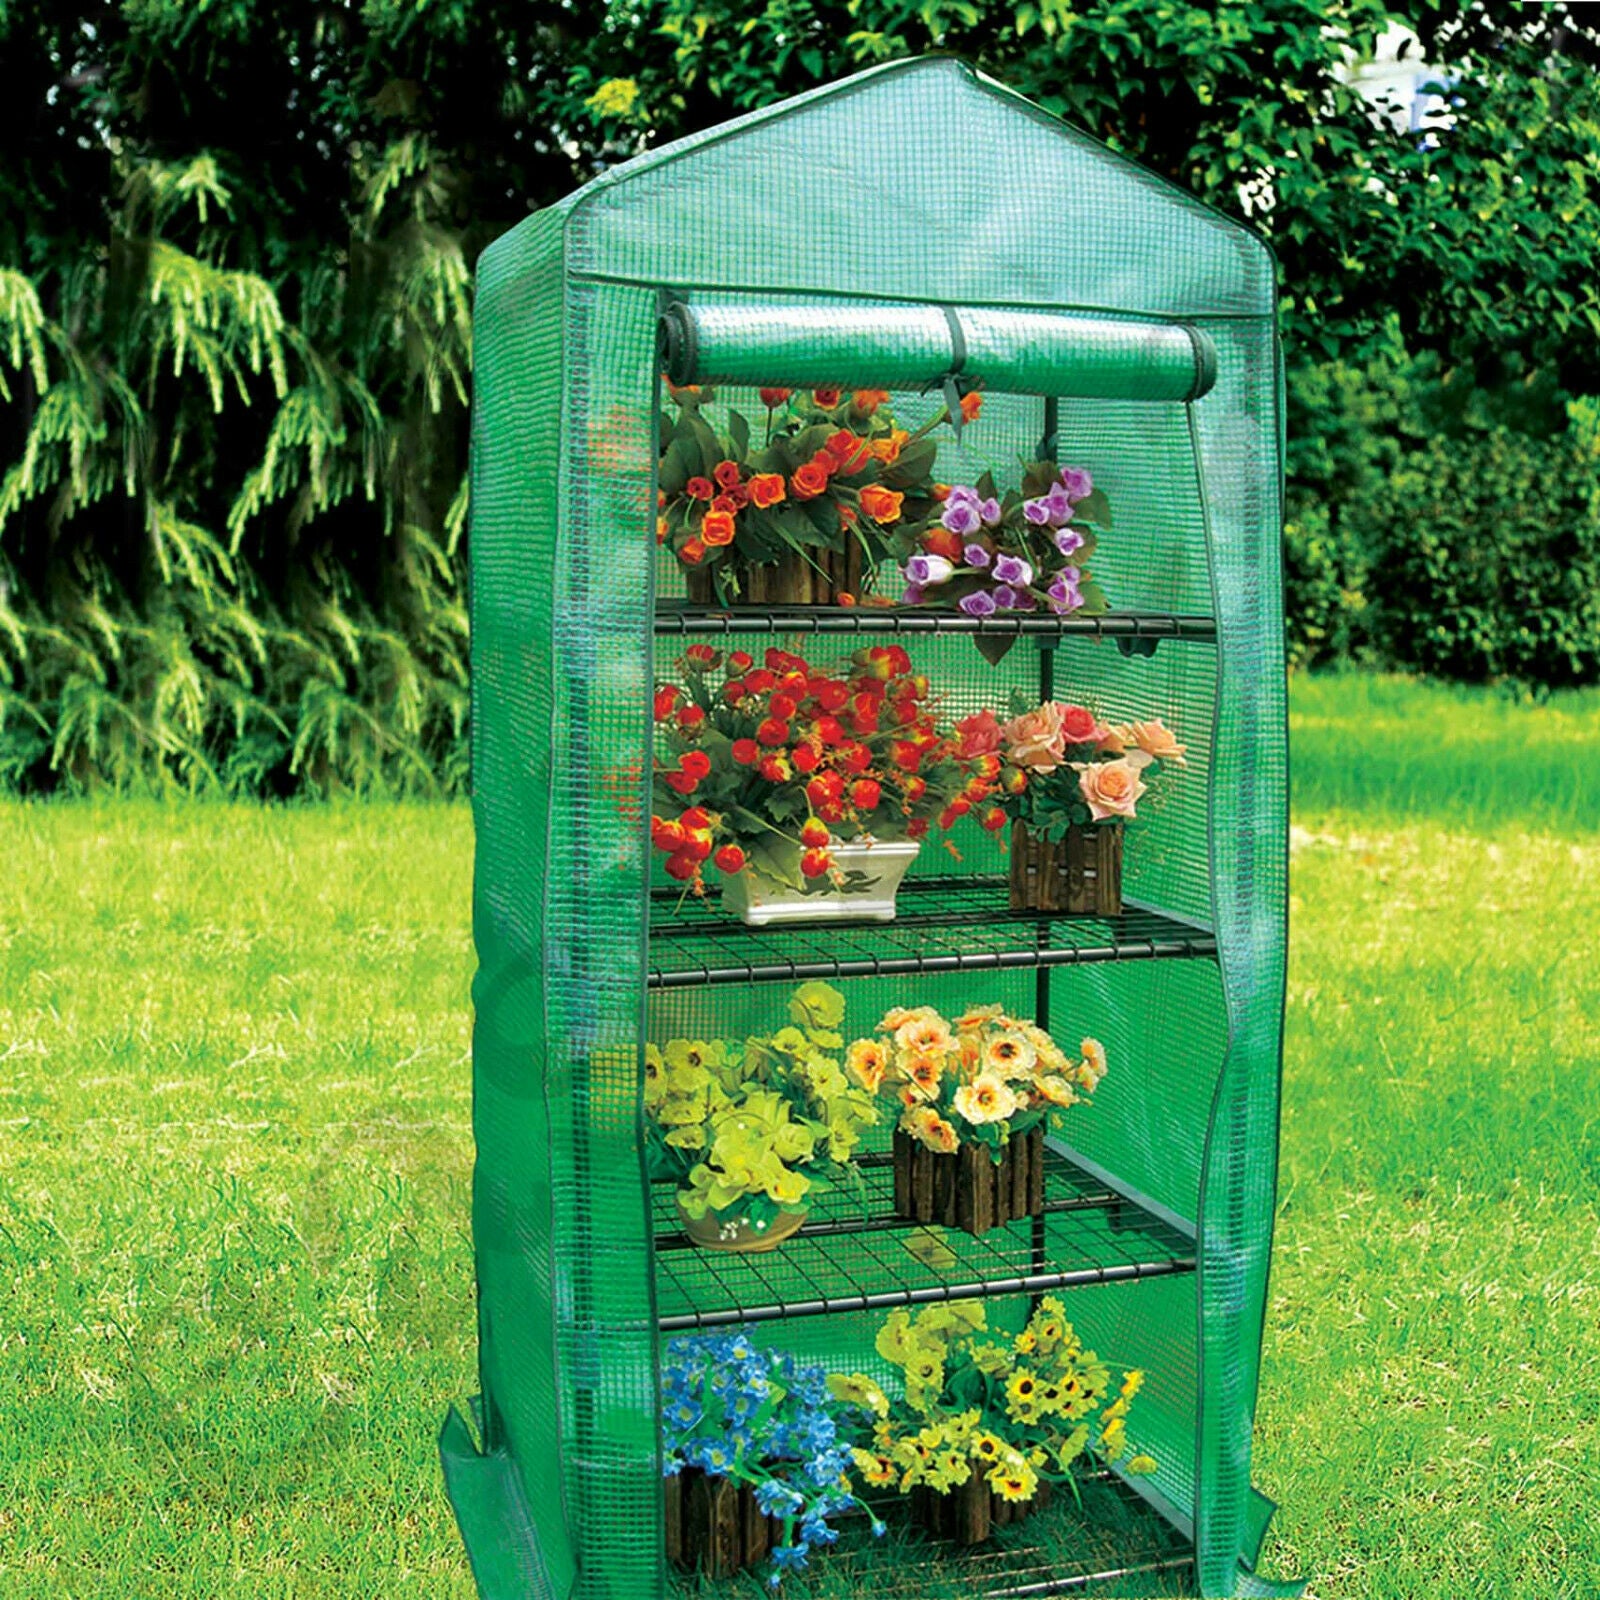 HomeDirect 4 Tier Mini Greenhouse with PE Cover and Roll-Up Zipper Door,26.97Lx19.29Wx62.99''H Small Garden Green House ,Indoor Outdoor Green House for Plants,Grow Seeds & Seedlings